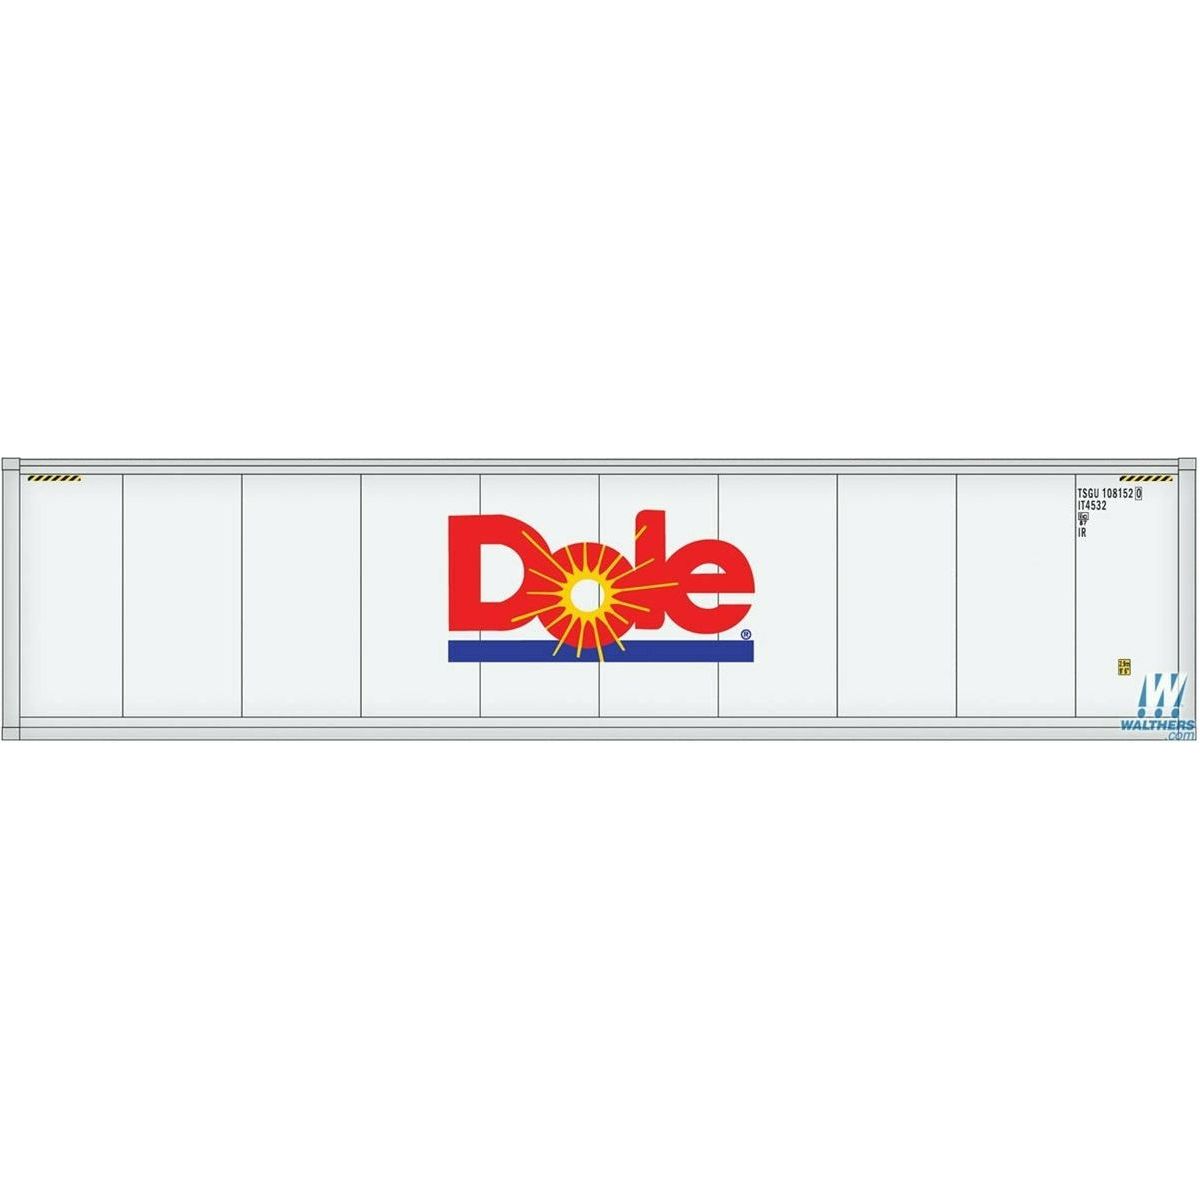 Walthers SceneMaster Line, HO Scale, 949-8359, 40' Hi-Cube Smooth Side Container, Dole